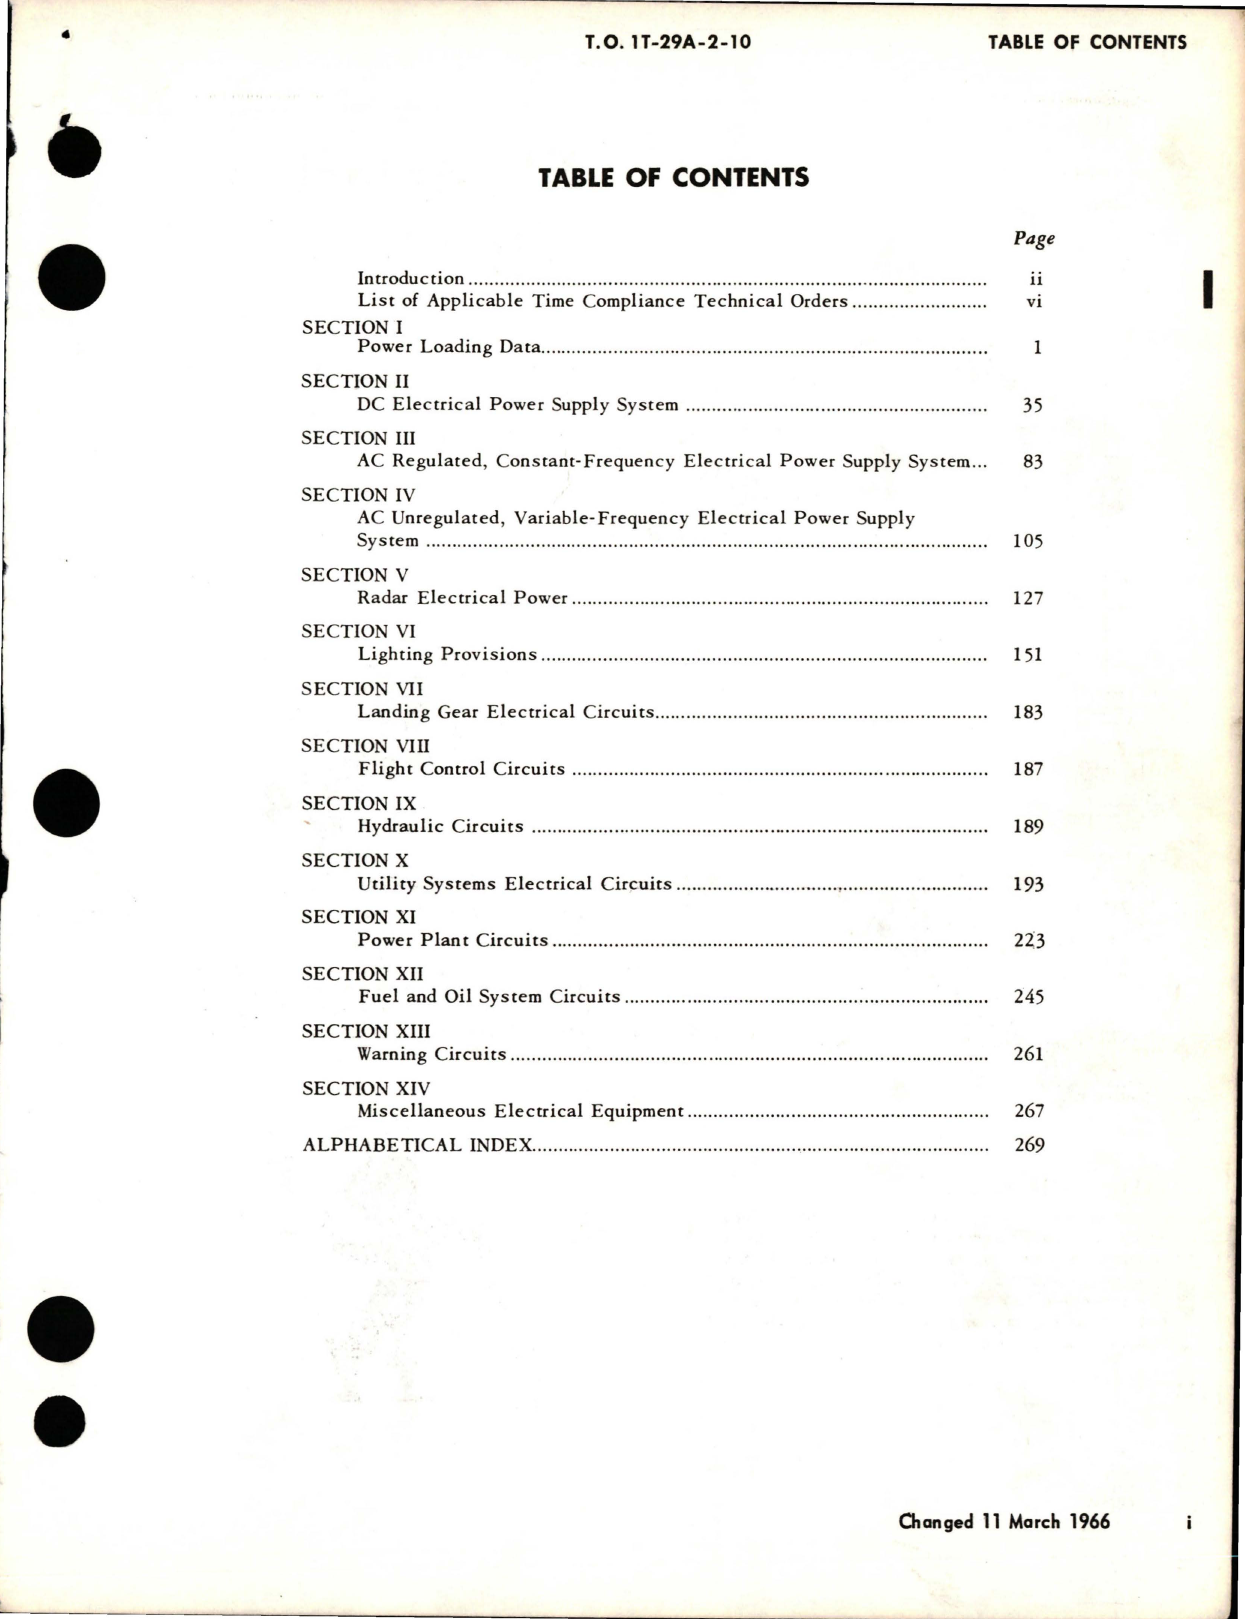 Sample page 5 from AirCorps Library document: Maintenance for Electrical Systems - T-29A, T-29B, T-29C and T-29D